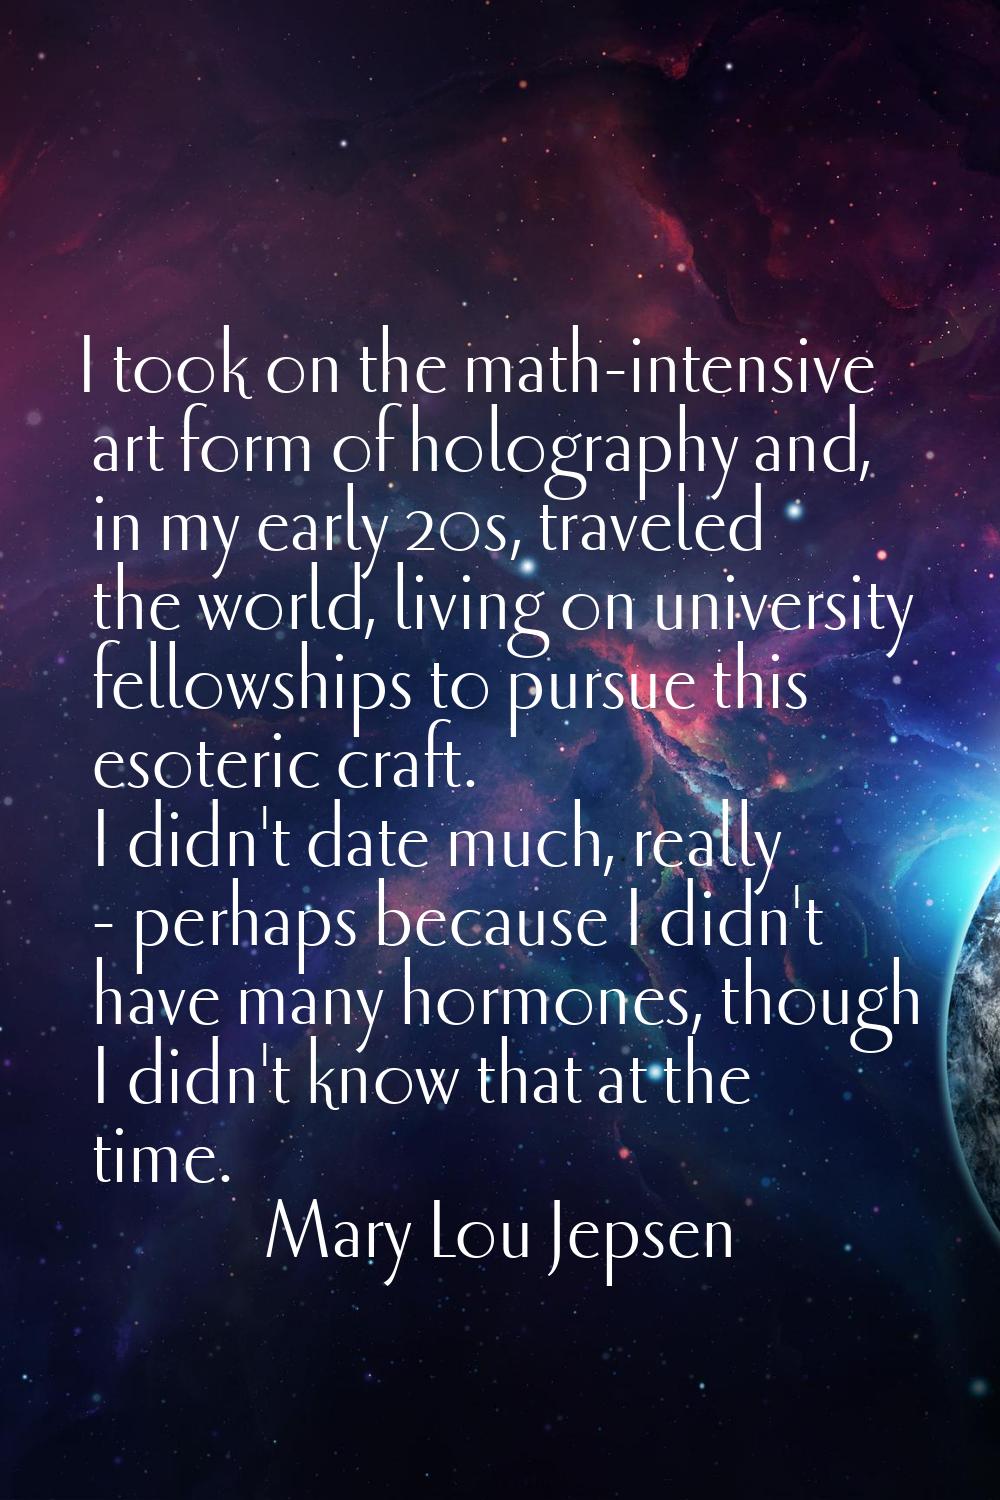 I took on the math-intensive art form of holography and, in my early 20s, traveled the world, livin